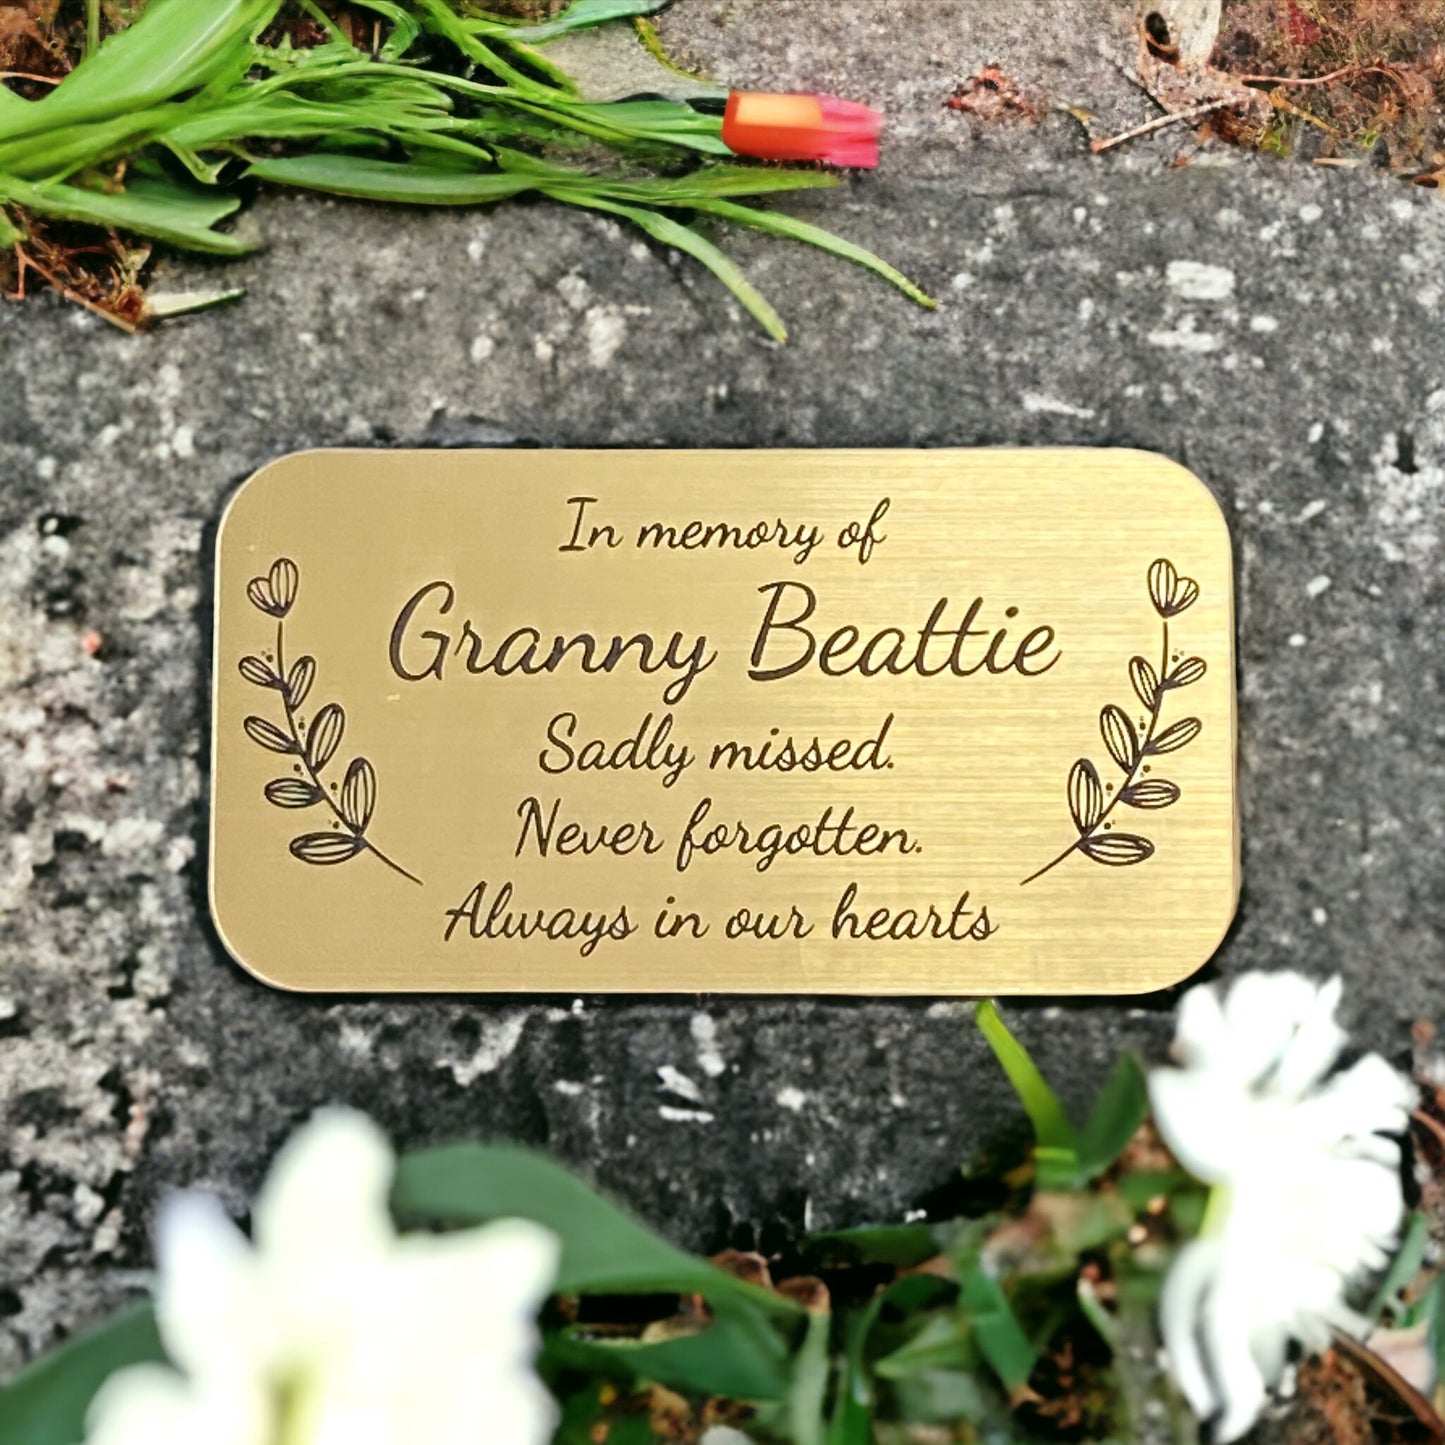 Memorial Plaques - For Benches, Grave Markers and Trees